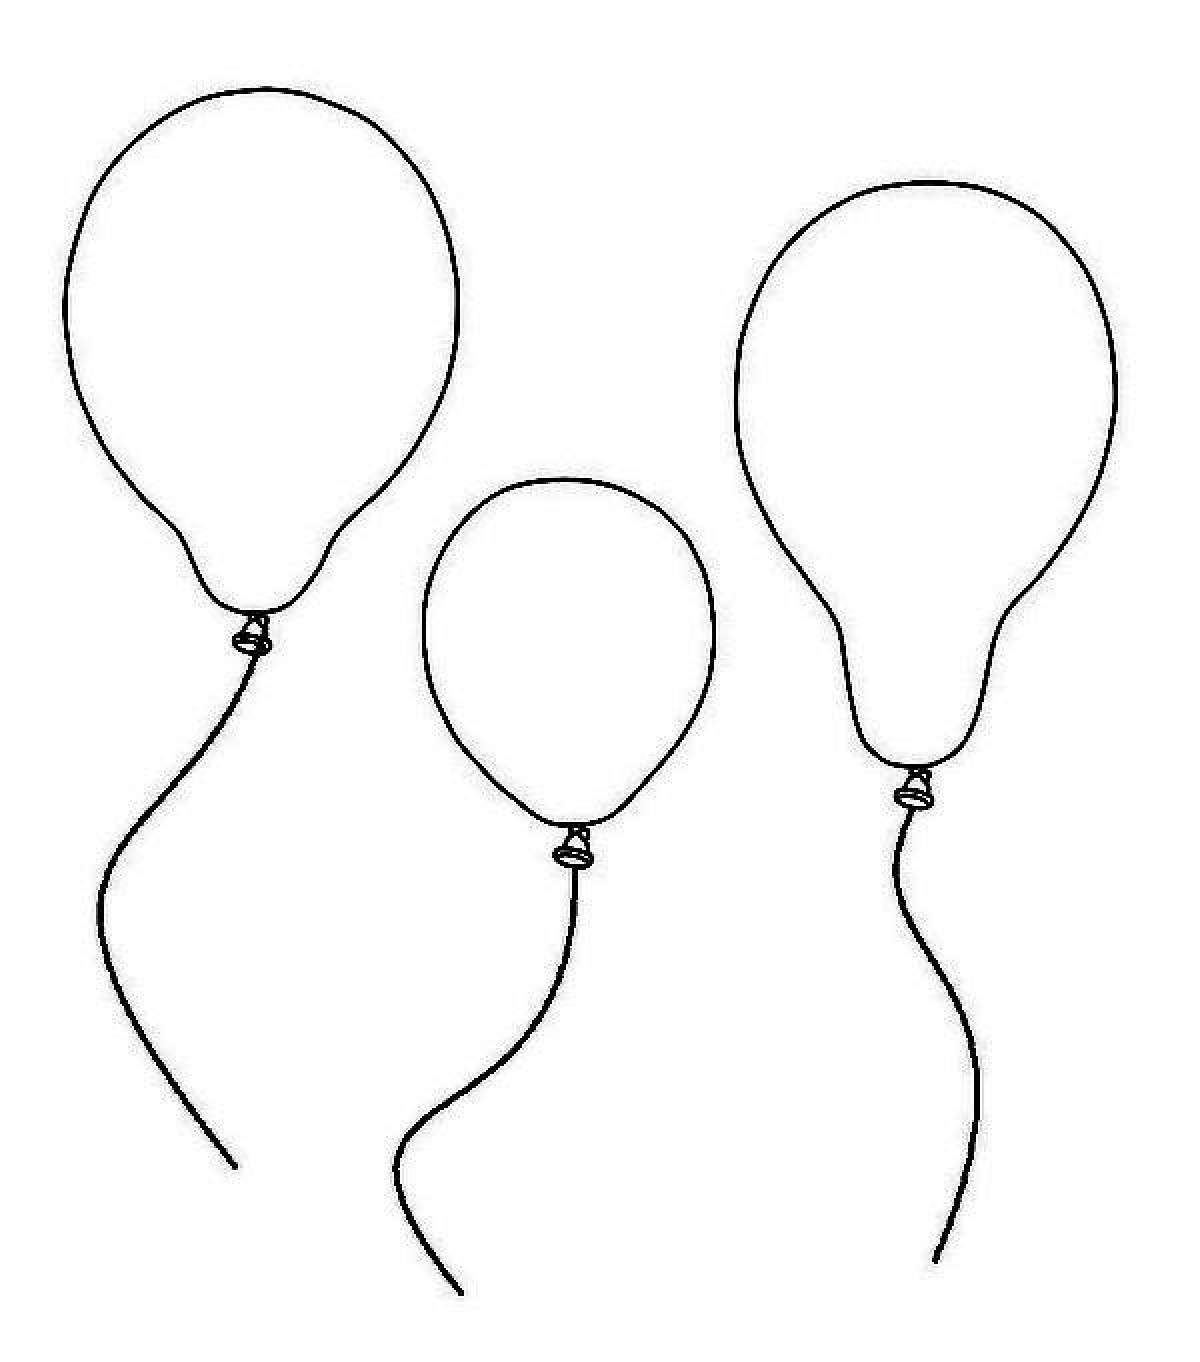 Shining balloons coloring book for kids